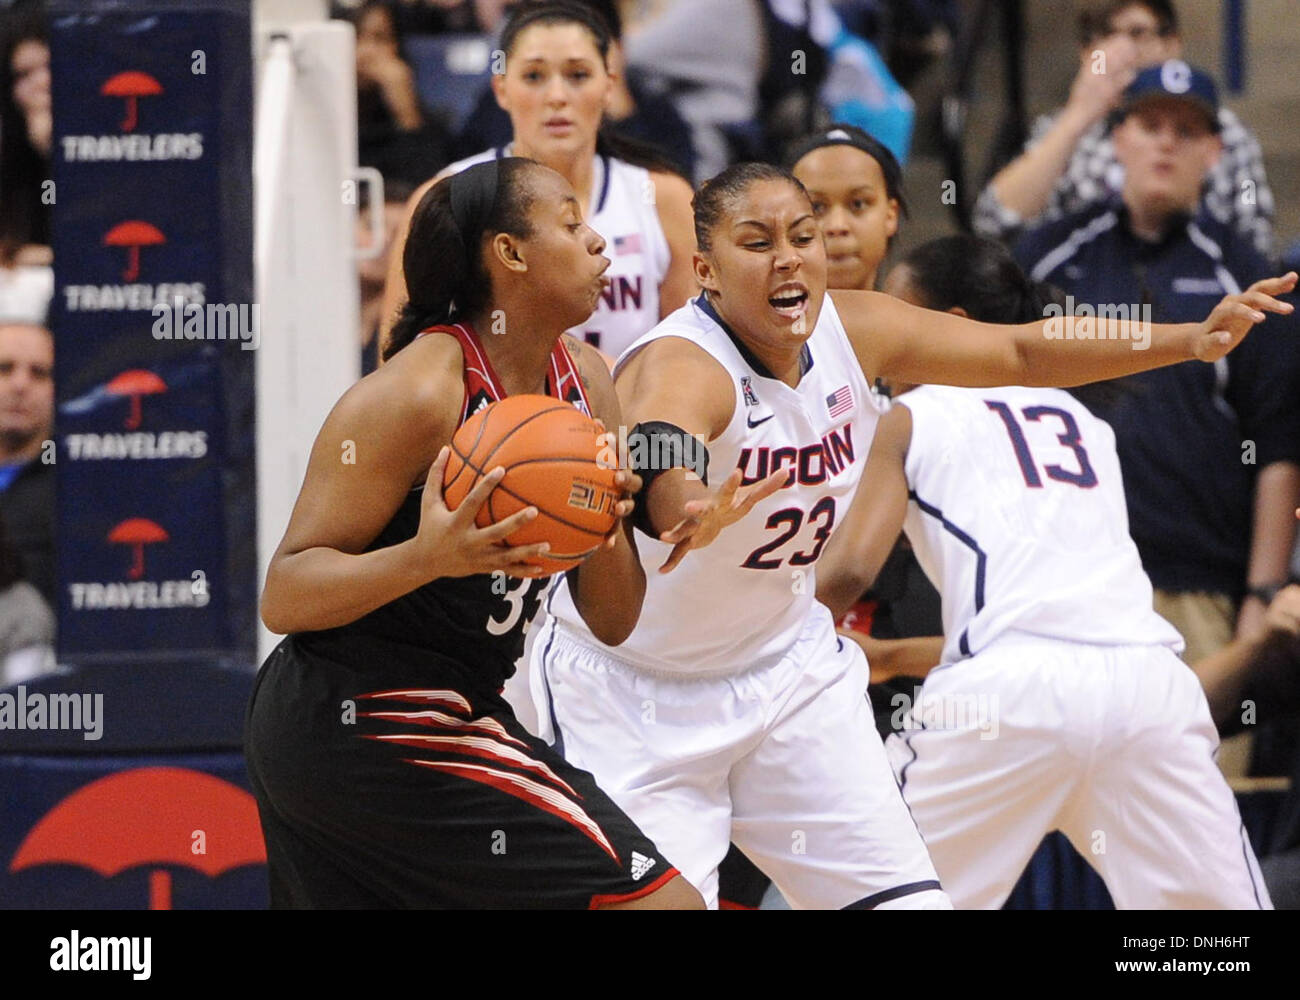 Storrs, CT, USA. 22nd Nov, 2013. Sunday December 29, 2013: Cincinnati Bearcats forward Jeanise Randolph (33) gets to a loose ball in front of UConn huskies guard-forward Kaleena Mosqueda Lewis (23) during the 2nd half of the womens NCAA basketball game between Cincinnati and Connecticut at Gampel Pavilion in Storrs, CT. UConn beat Cincinnati easily 67-34.Bill Shettle / Cal Sport Media. © csm/Alamy Live News Stock Photo